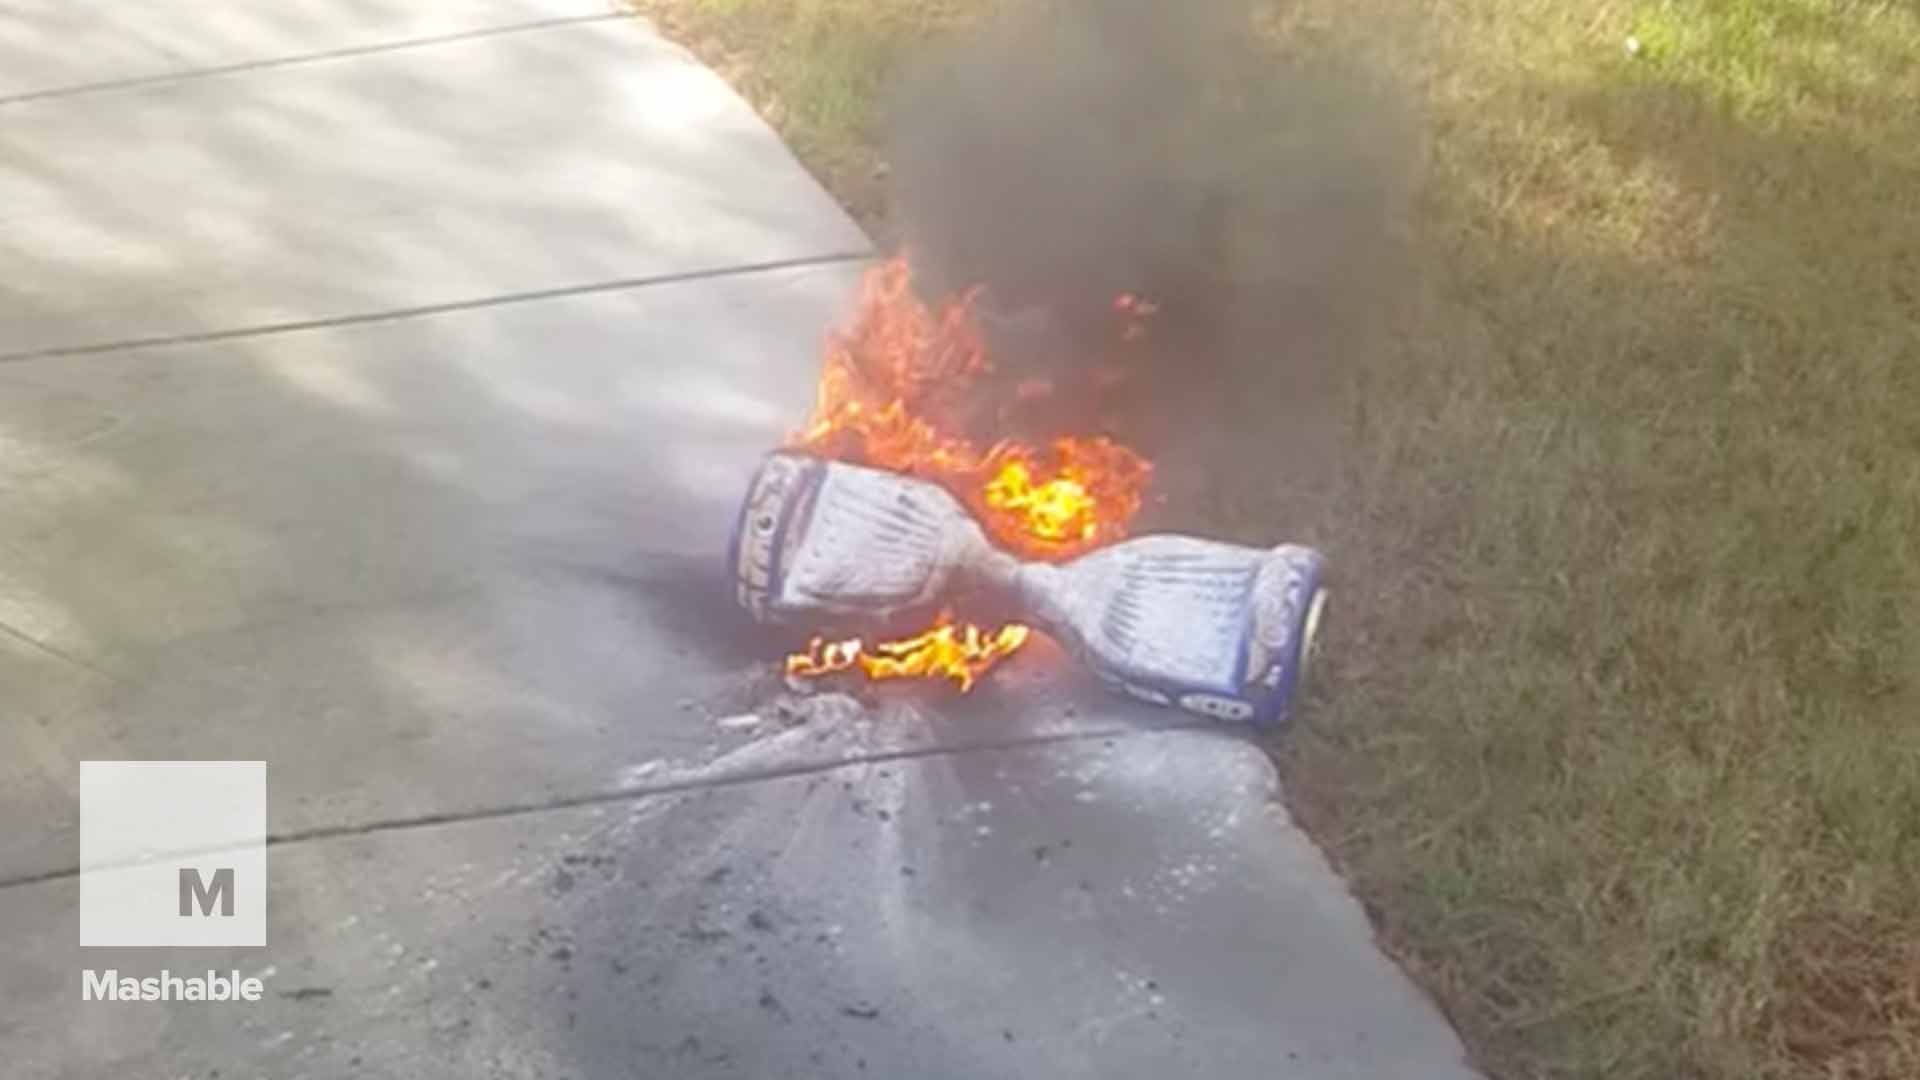 Hoverboard on fire: Man's scooter combusts on sidewalk - video Dailymotion